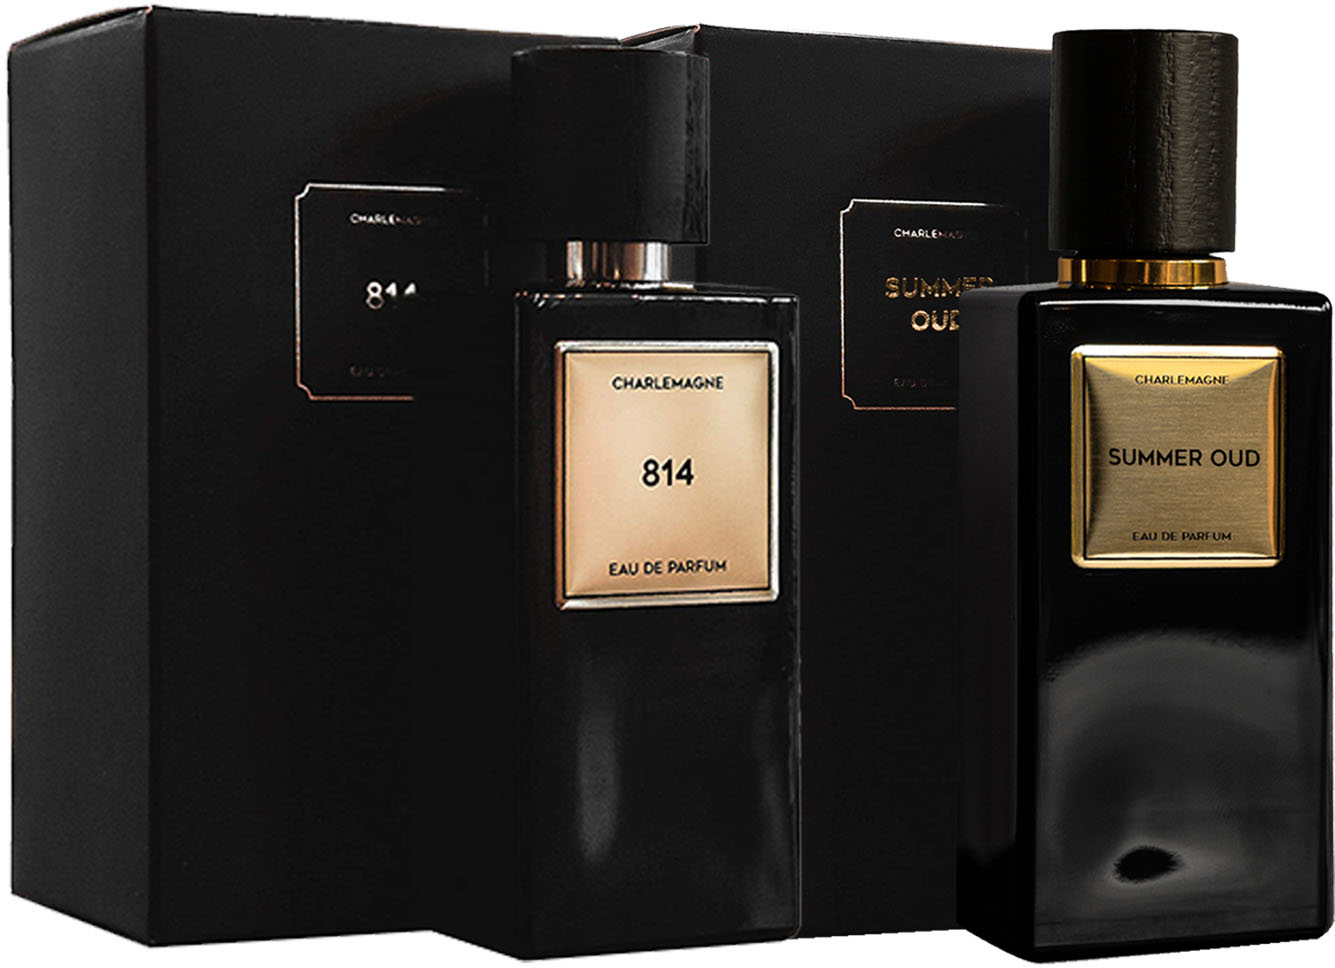 CHARLEMAGNE Duft-Set »The Scents«, tlg.) kaufen UNIVERSAL (4 